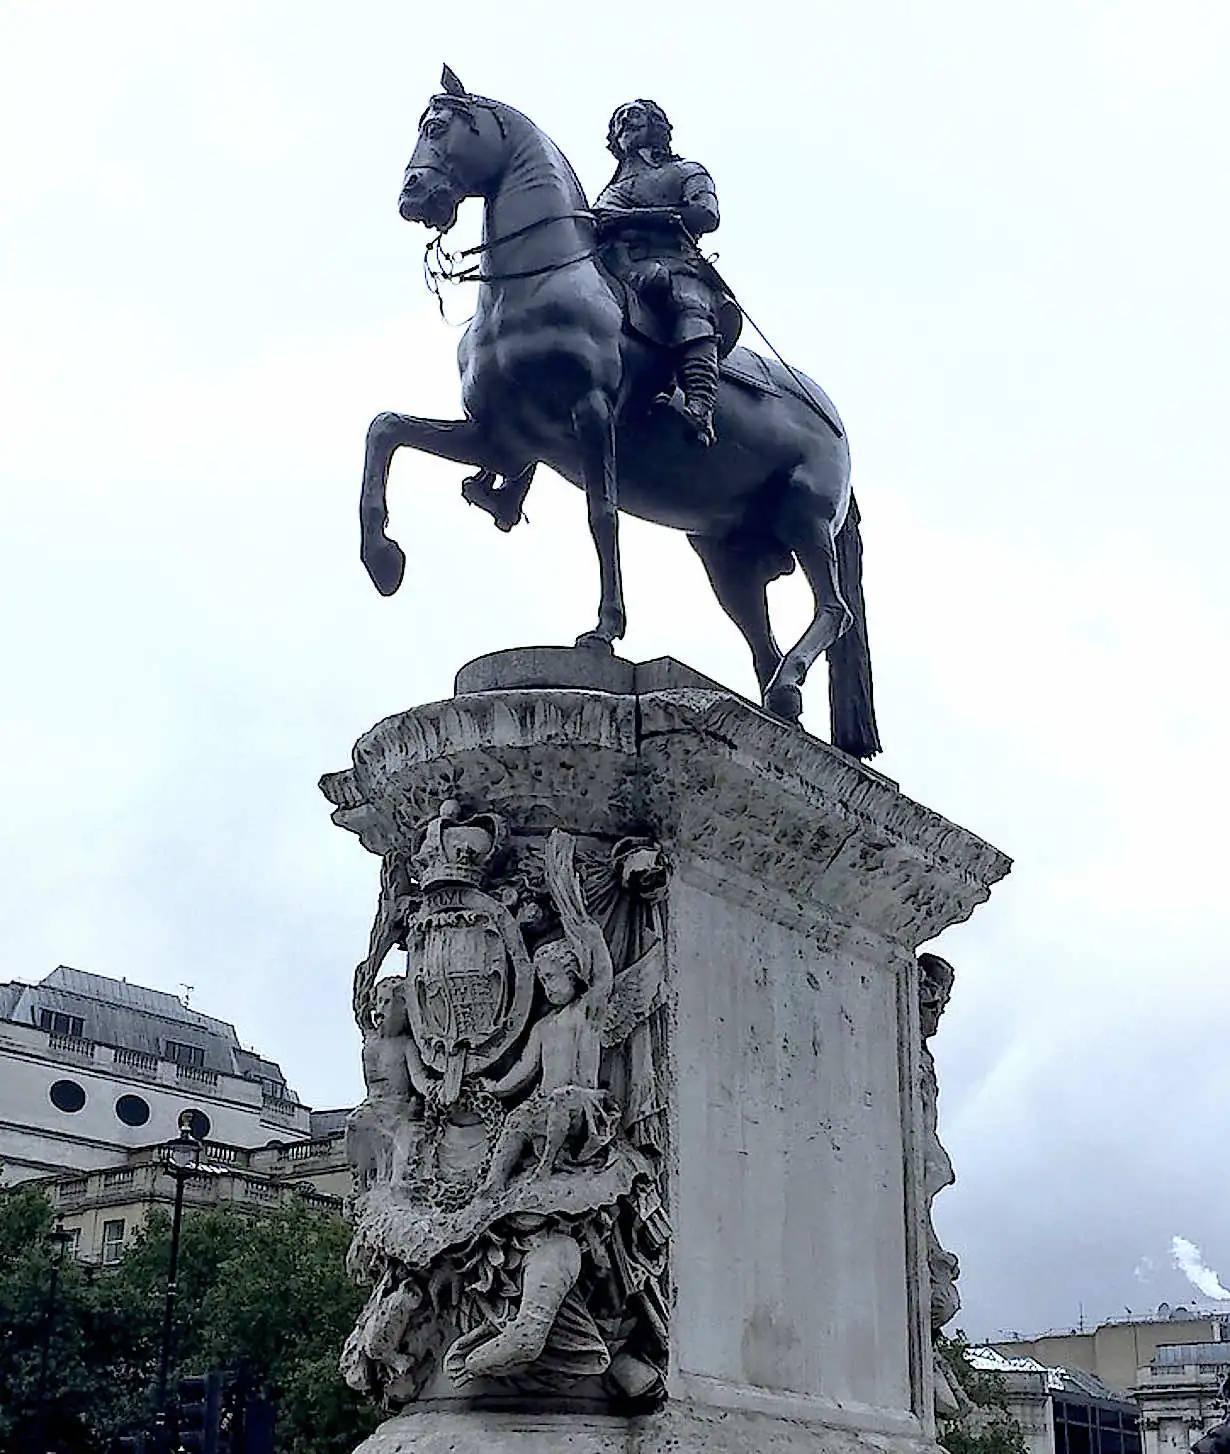 The Charles I statue in the centre of London